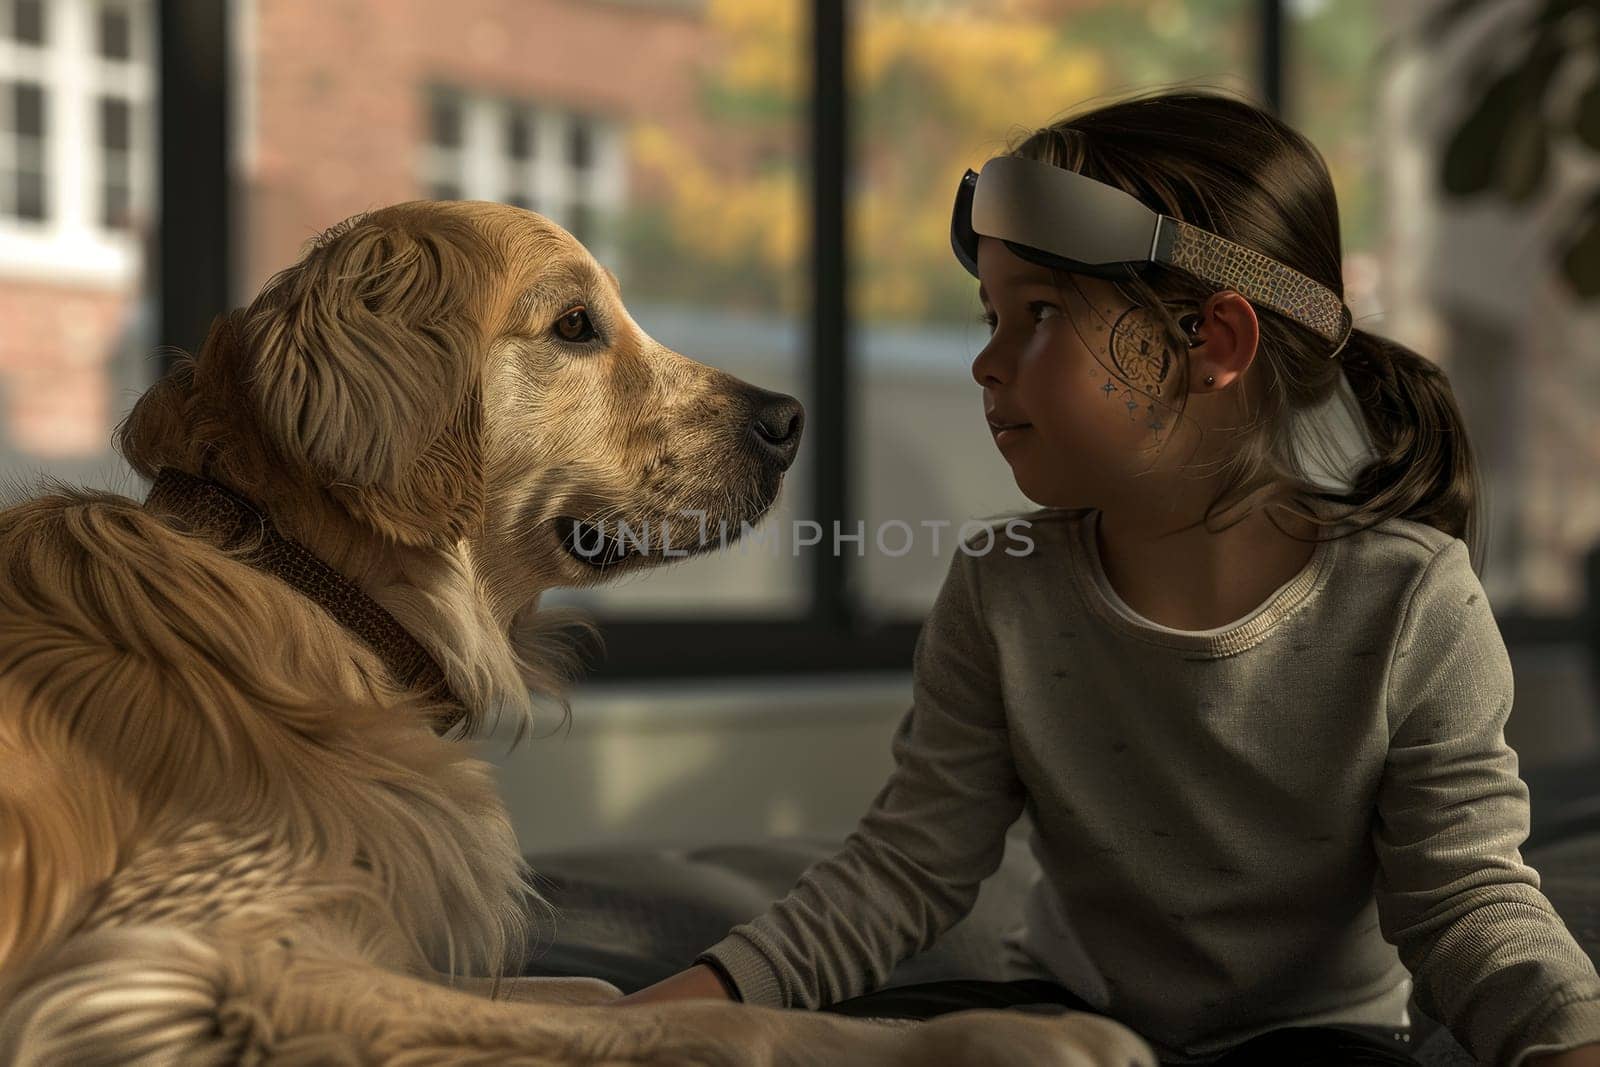 A young child wearing a unique headband gazes intently at a gentle golden retriever in a warm, sunlit room. This intimate moment captures the therapeutic bond between animals and children with autism